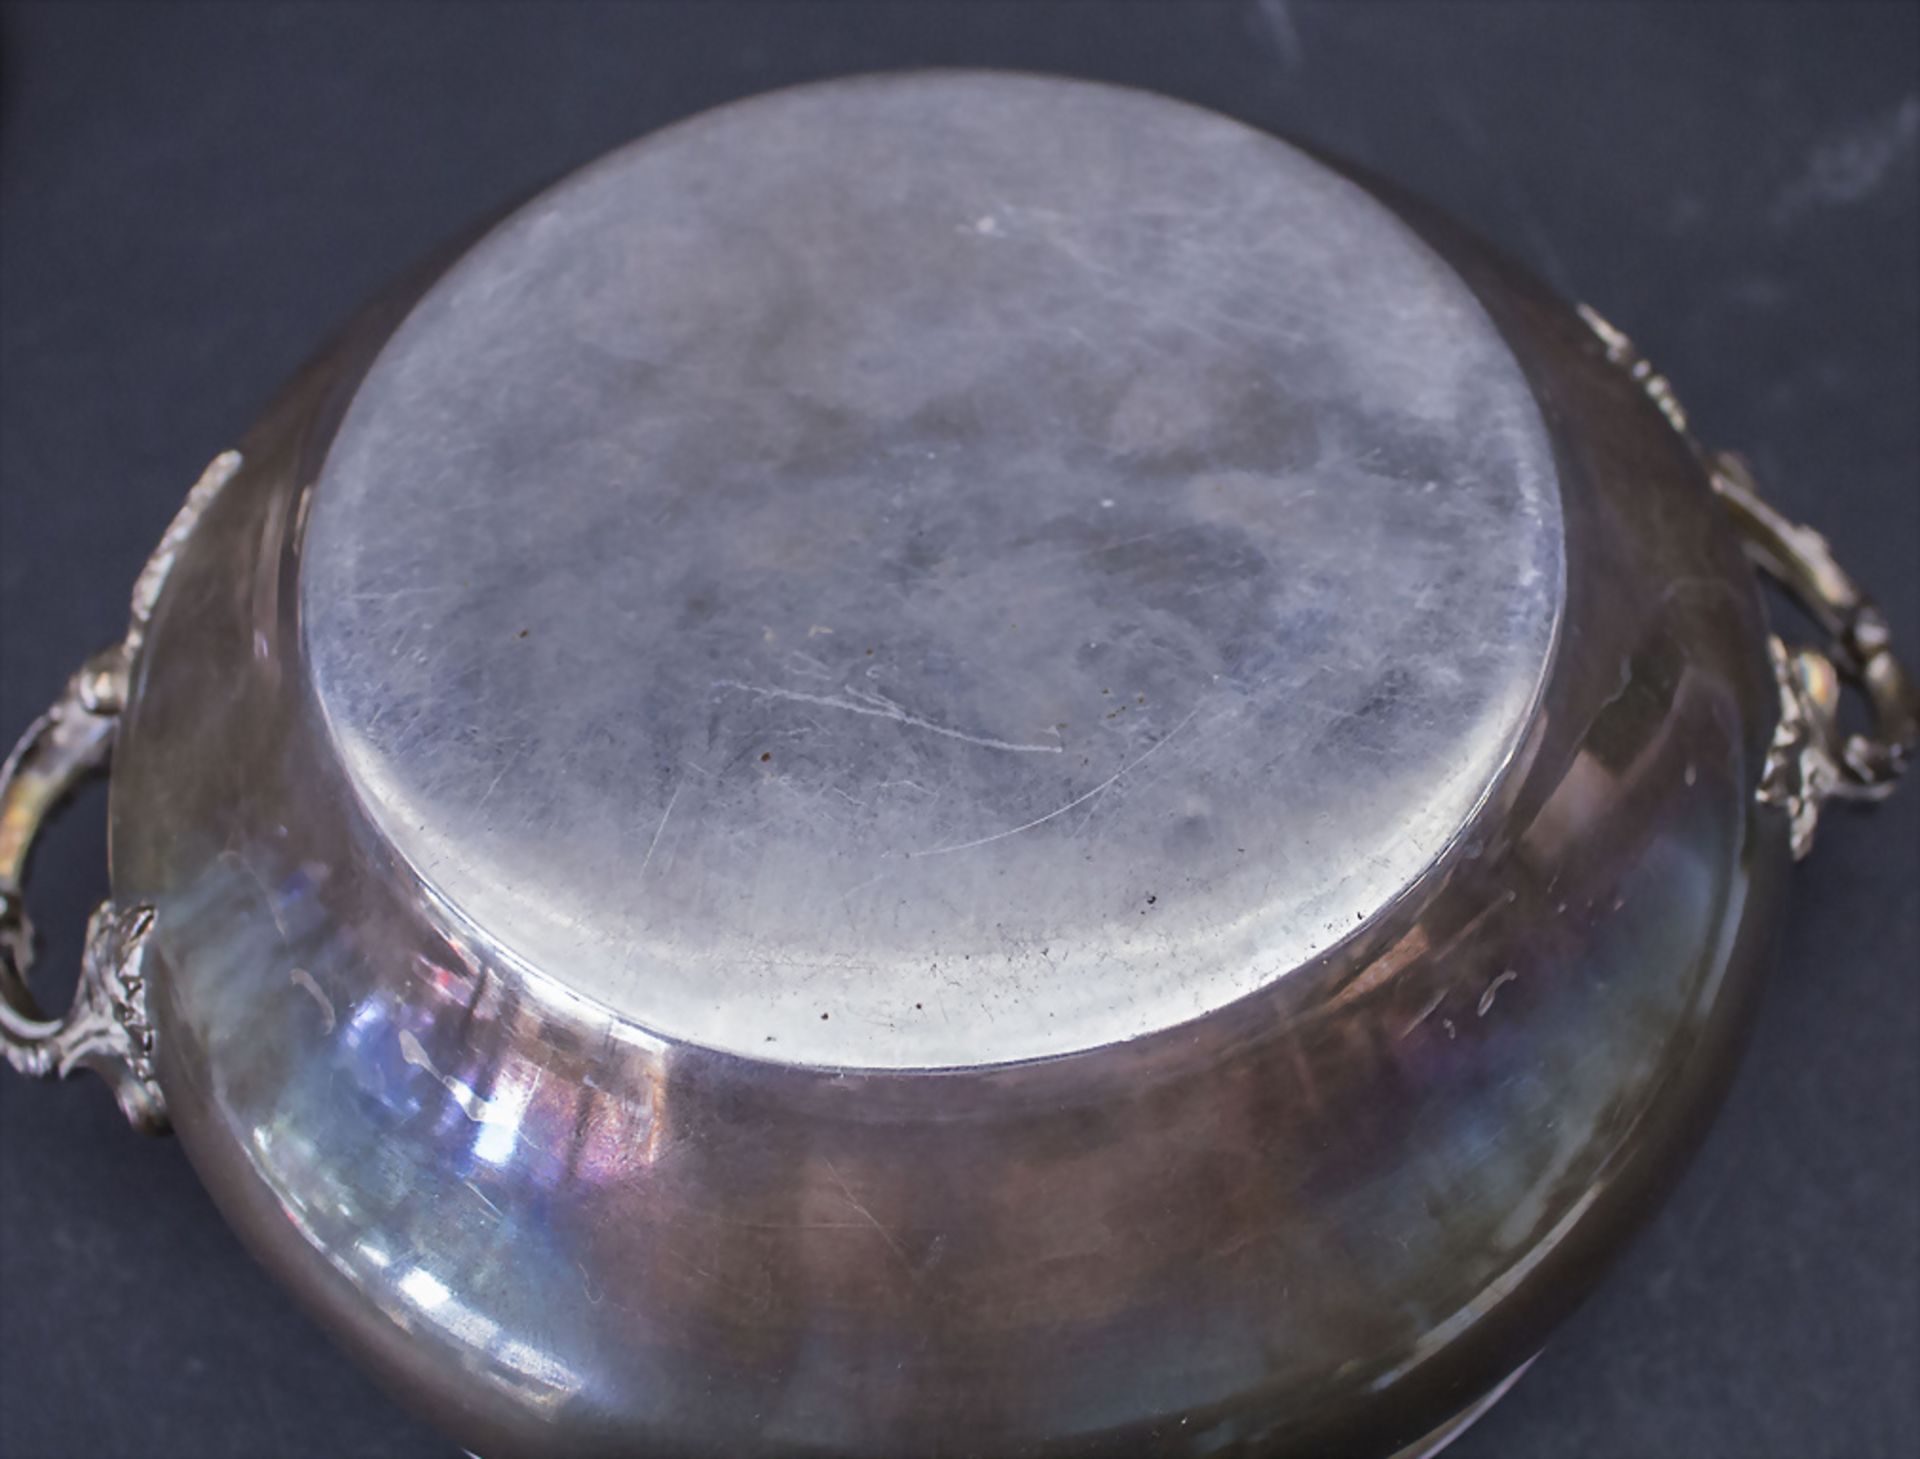 Deckelterrine / A covered silver tureen / Légumier en argent massif, Frankreich, Mitte 19. Jh. - Image 4 of 5